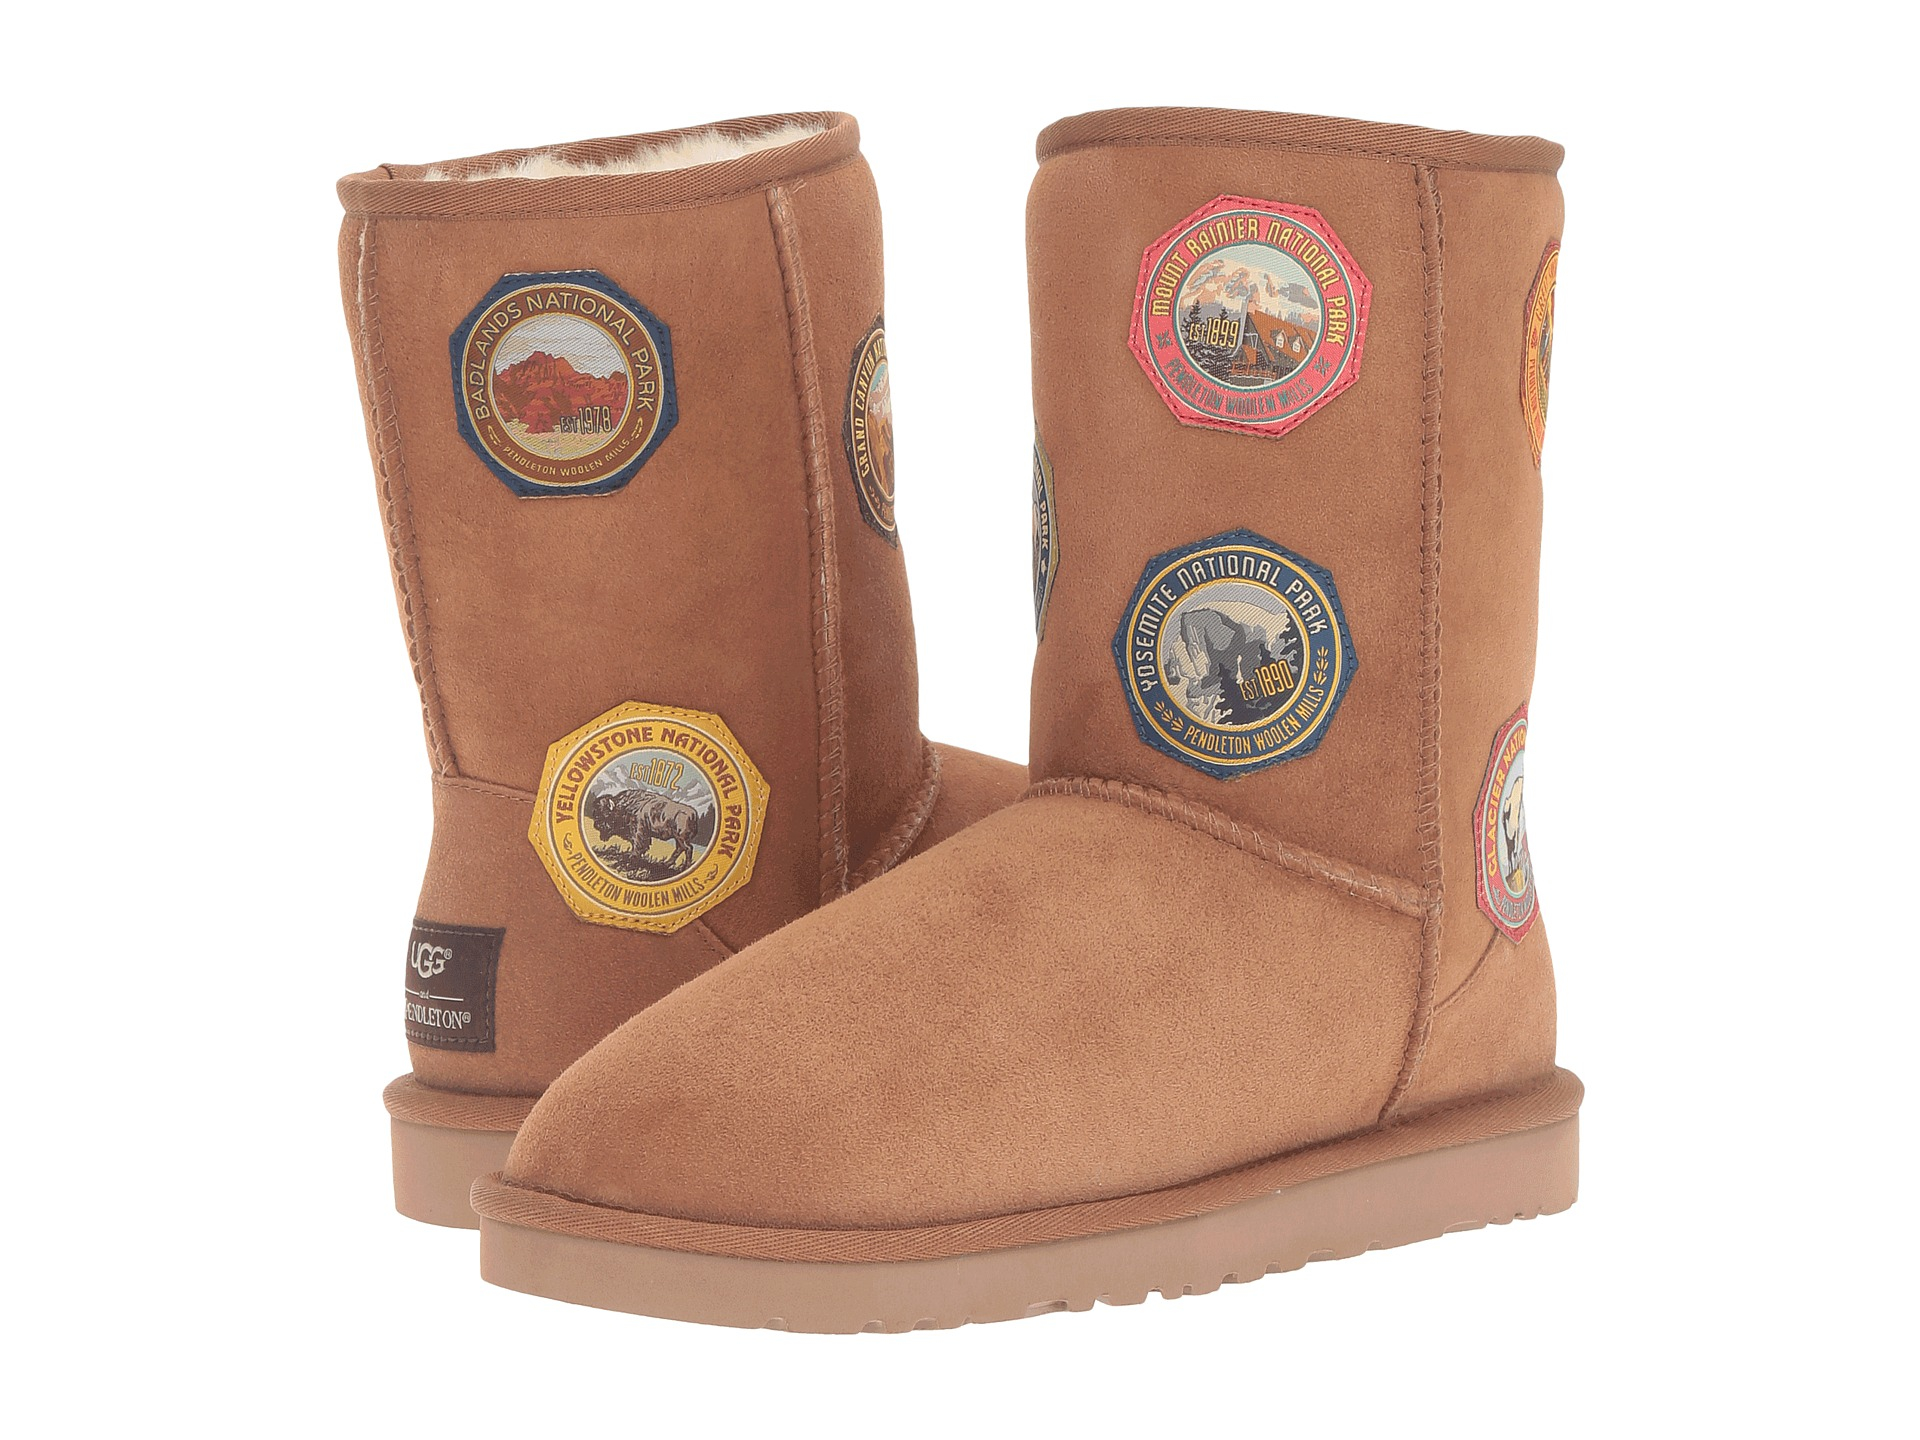 ugg boots with patches